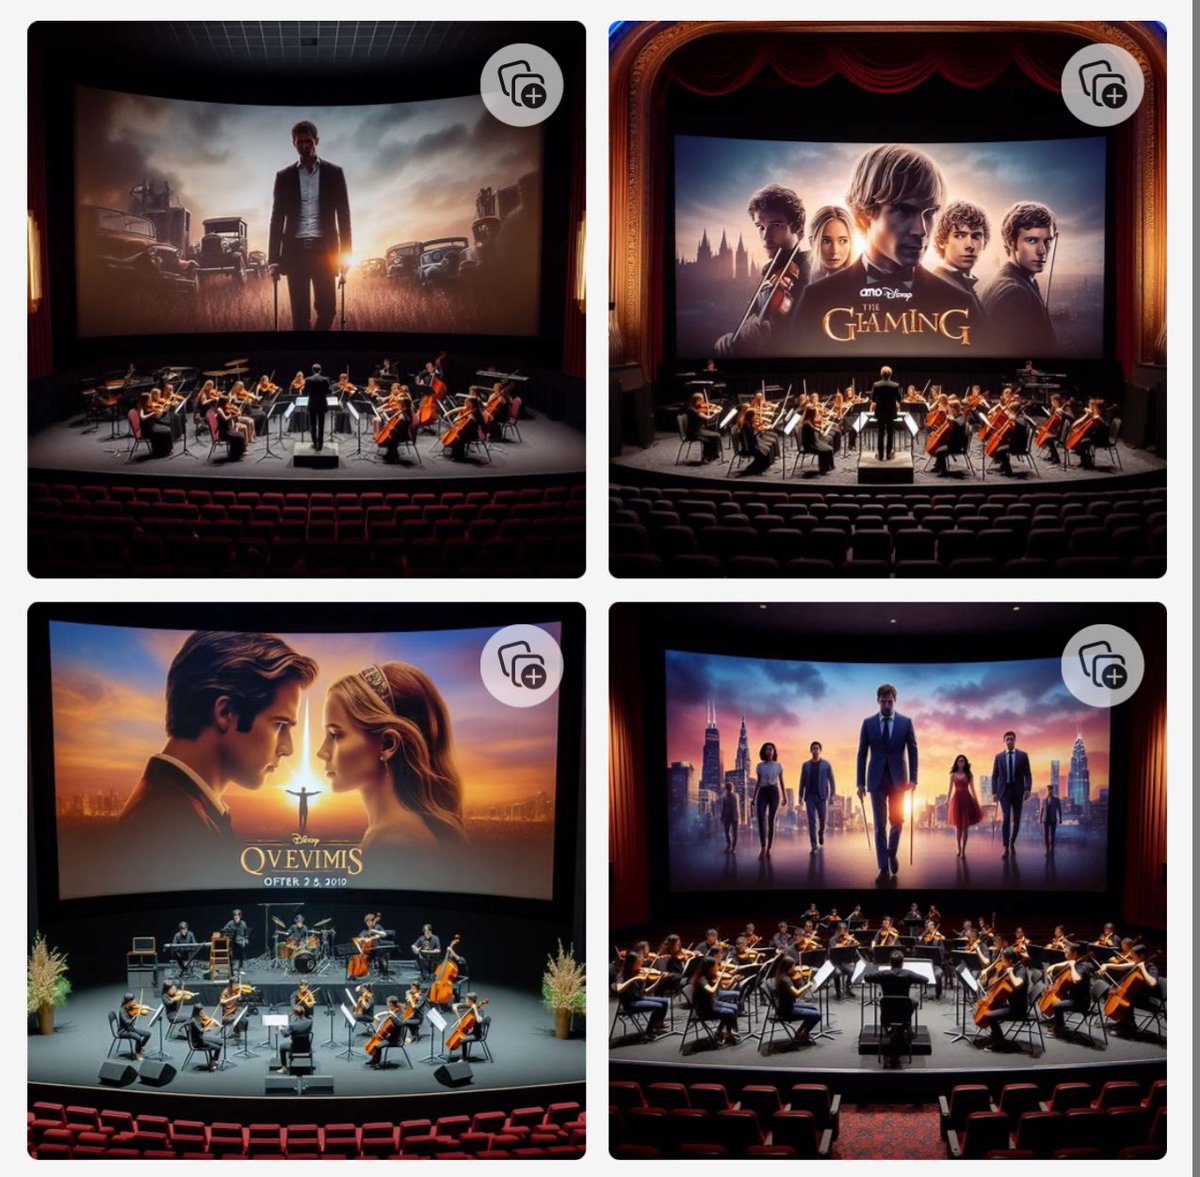 It’s been popular for audience to come experience just the soundtracks of movies by @HansZimmer #dannyelfman #johnwilliams #howardshore #thomasnewman @amctheatres can definitely set stages up for premier live orchestra events @amcideasgroup @MehulRRao @CEOAdam $amc #amc